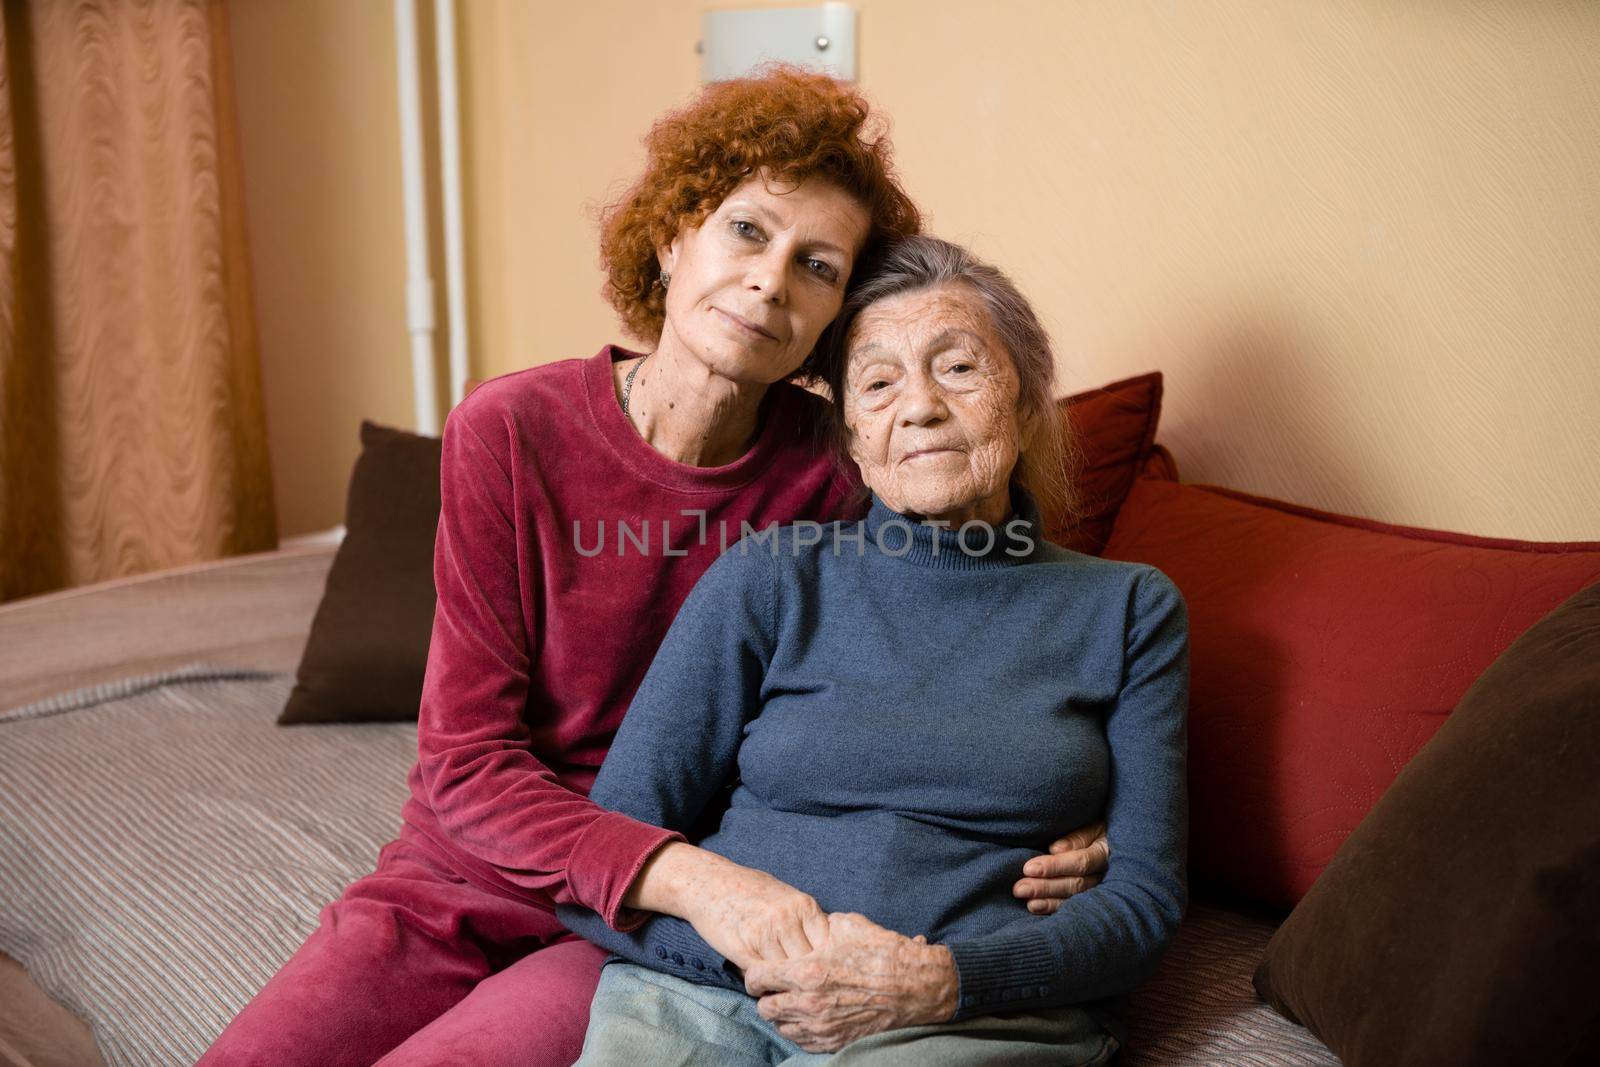 Mother and daughter, mature woman with red hair and elderly old cute happy lady woman with gray hair and deep wrinkles, embrace together at home and smile happily, family ties and caring for parents.